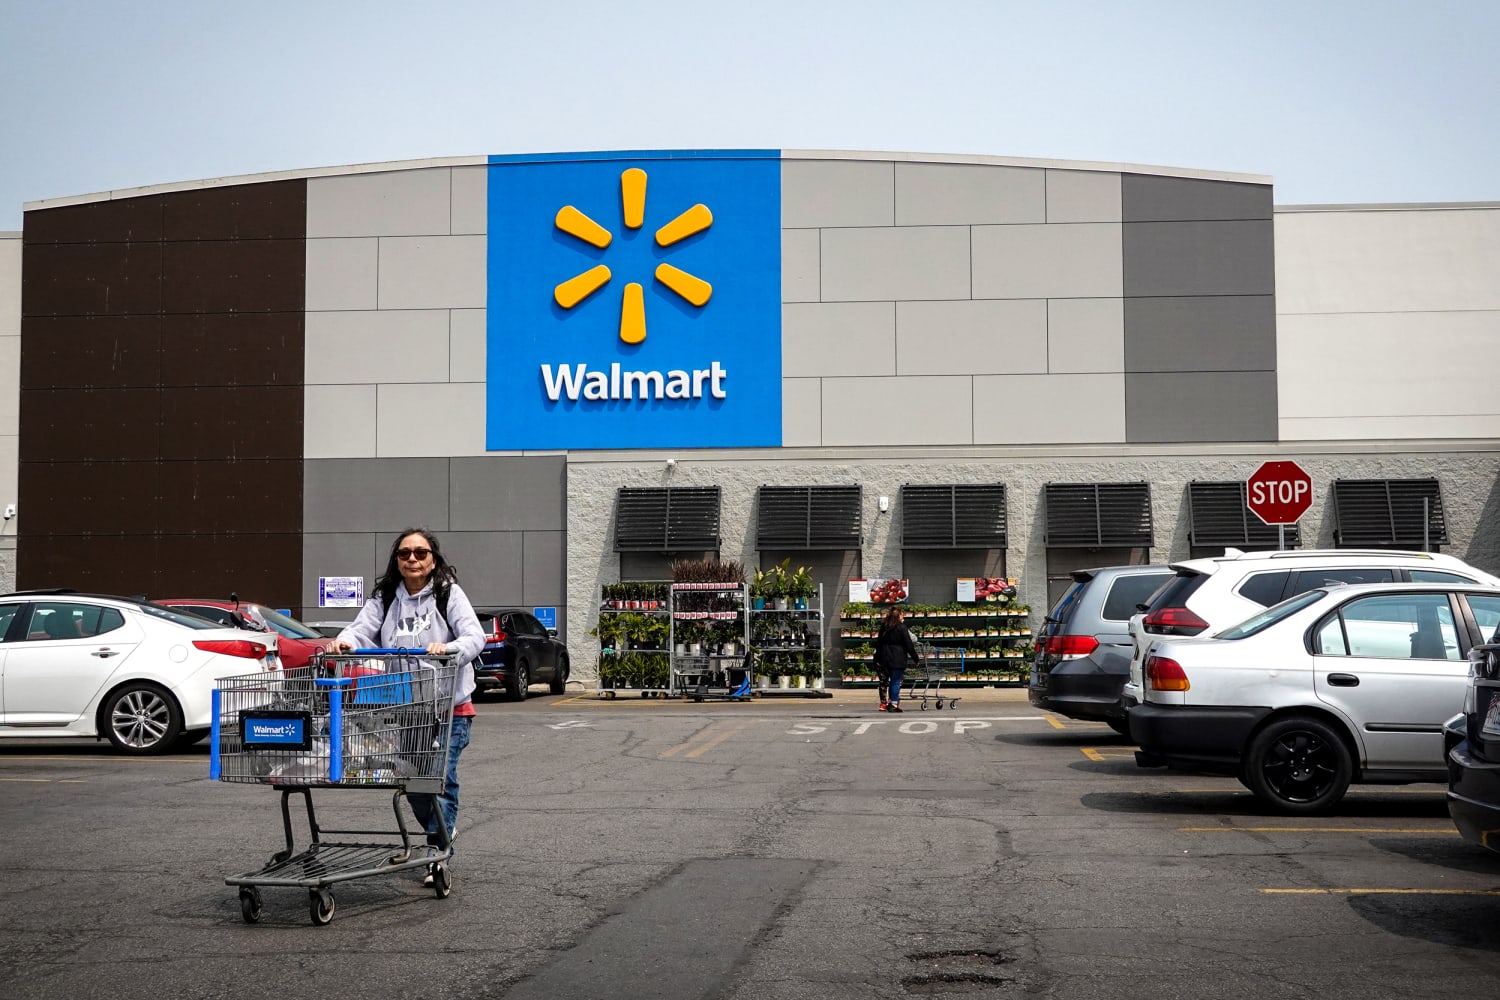 Walmart has not made changes to LGBTQ-themed merchandise in wake of Target backlash